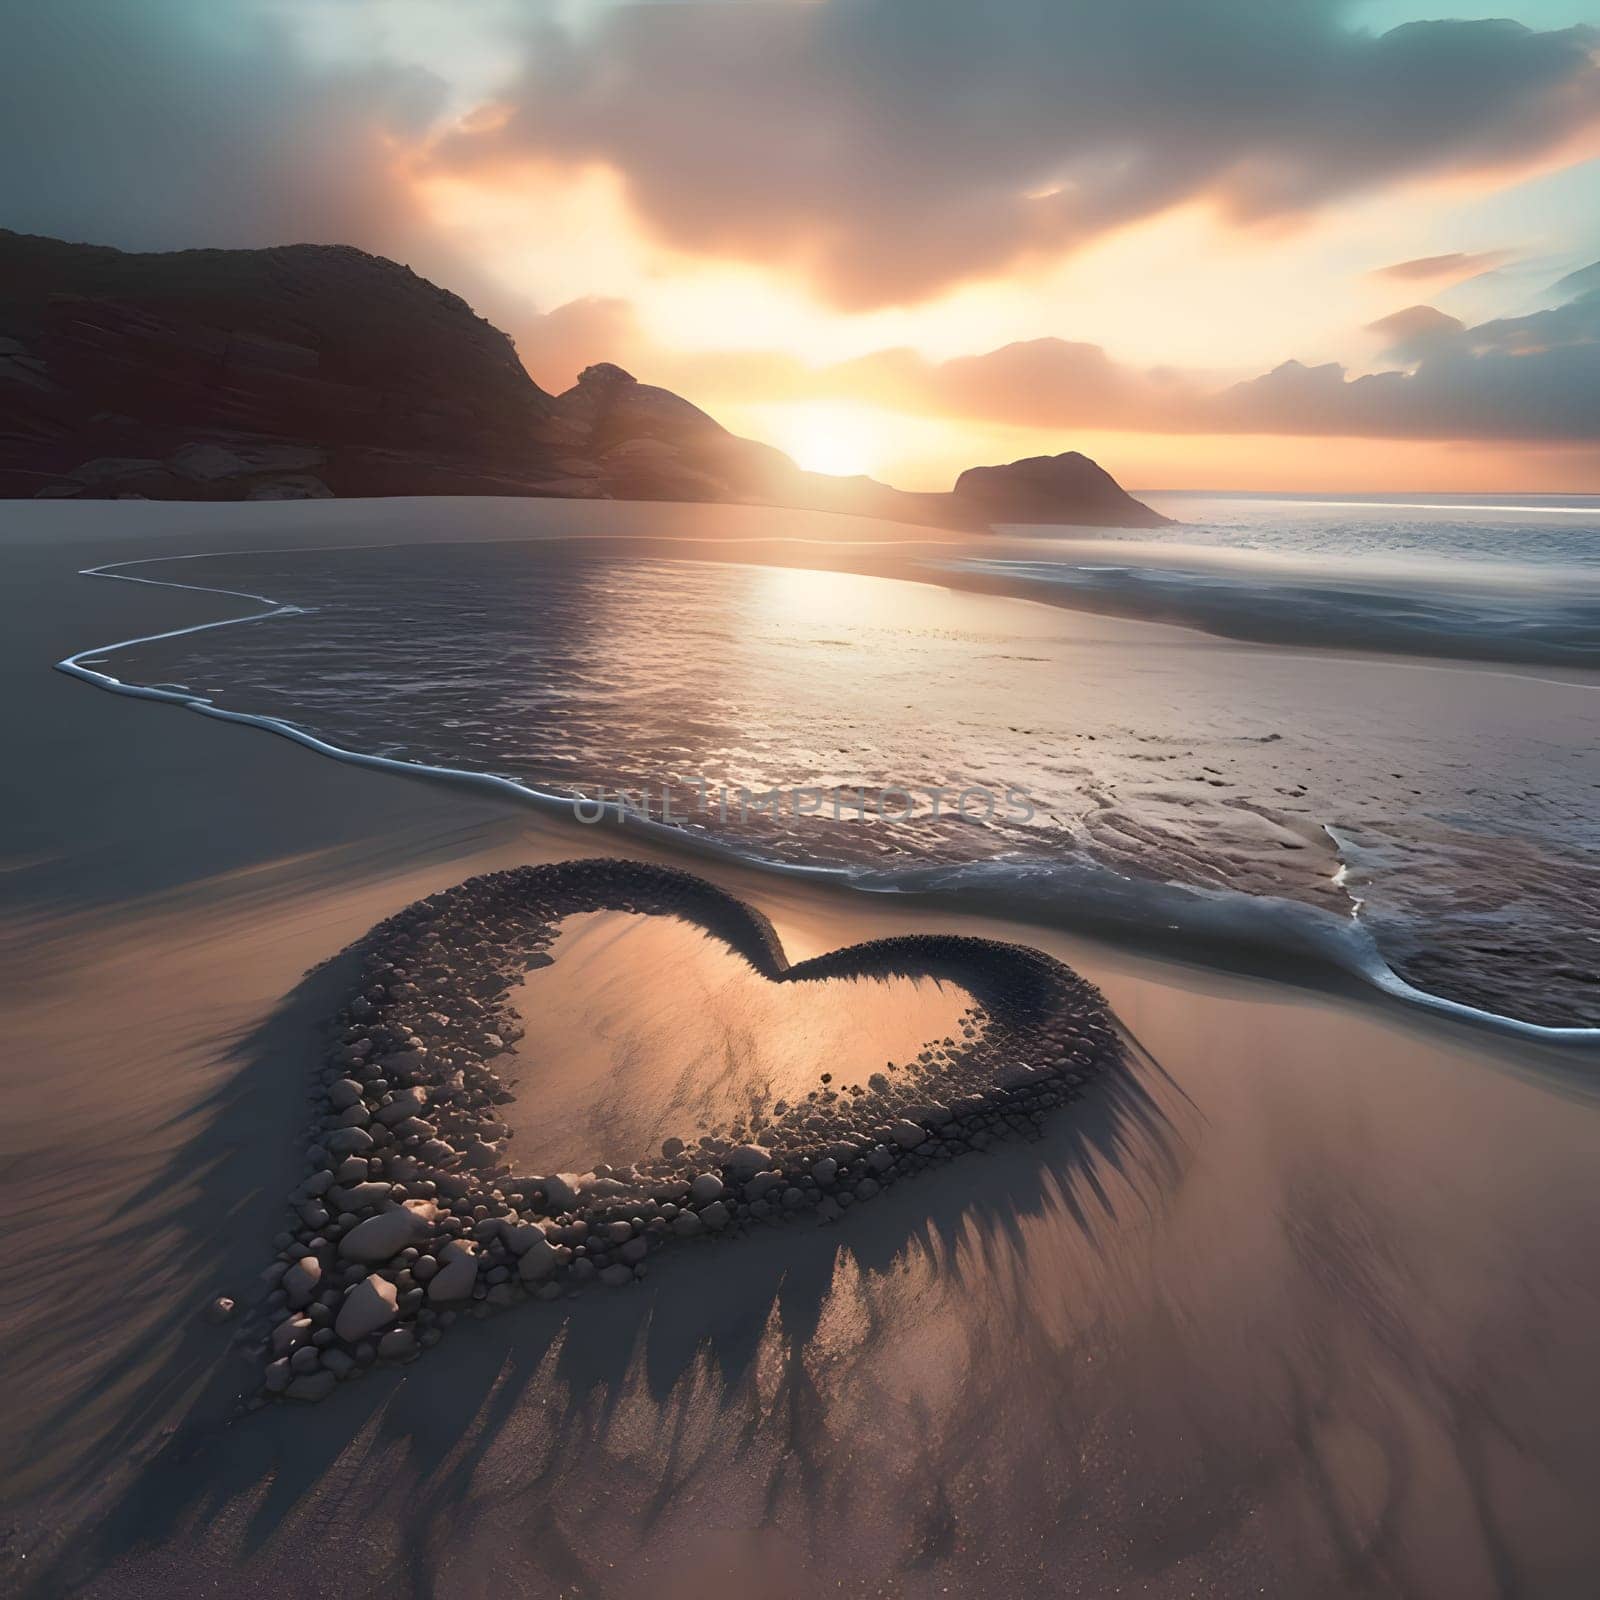 Heart arranged on the sand on the beach of small stones, sunset in the background. Heart as a symbol of affection and love. The time of falling in love and love.